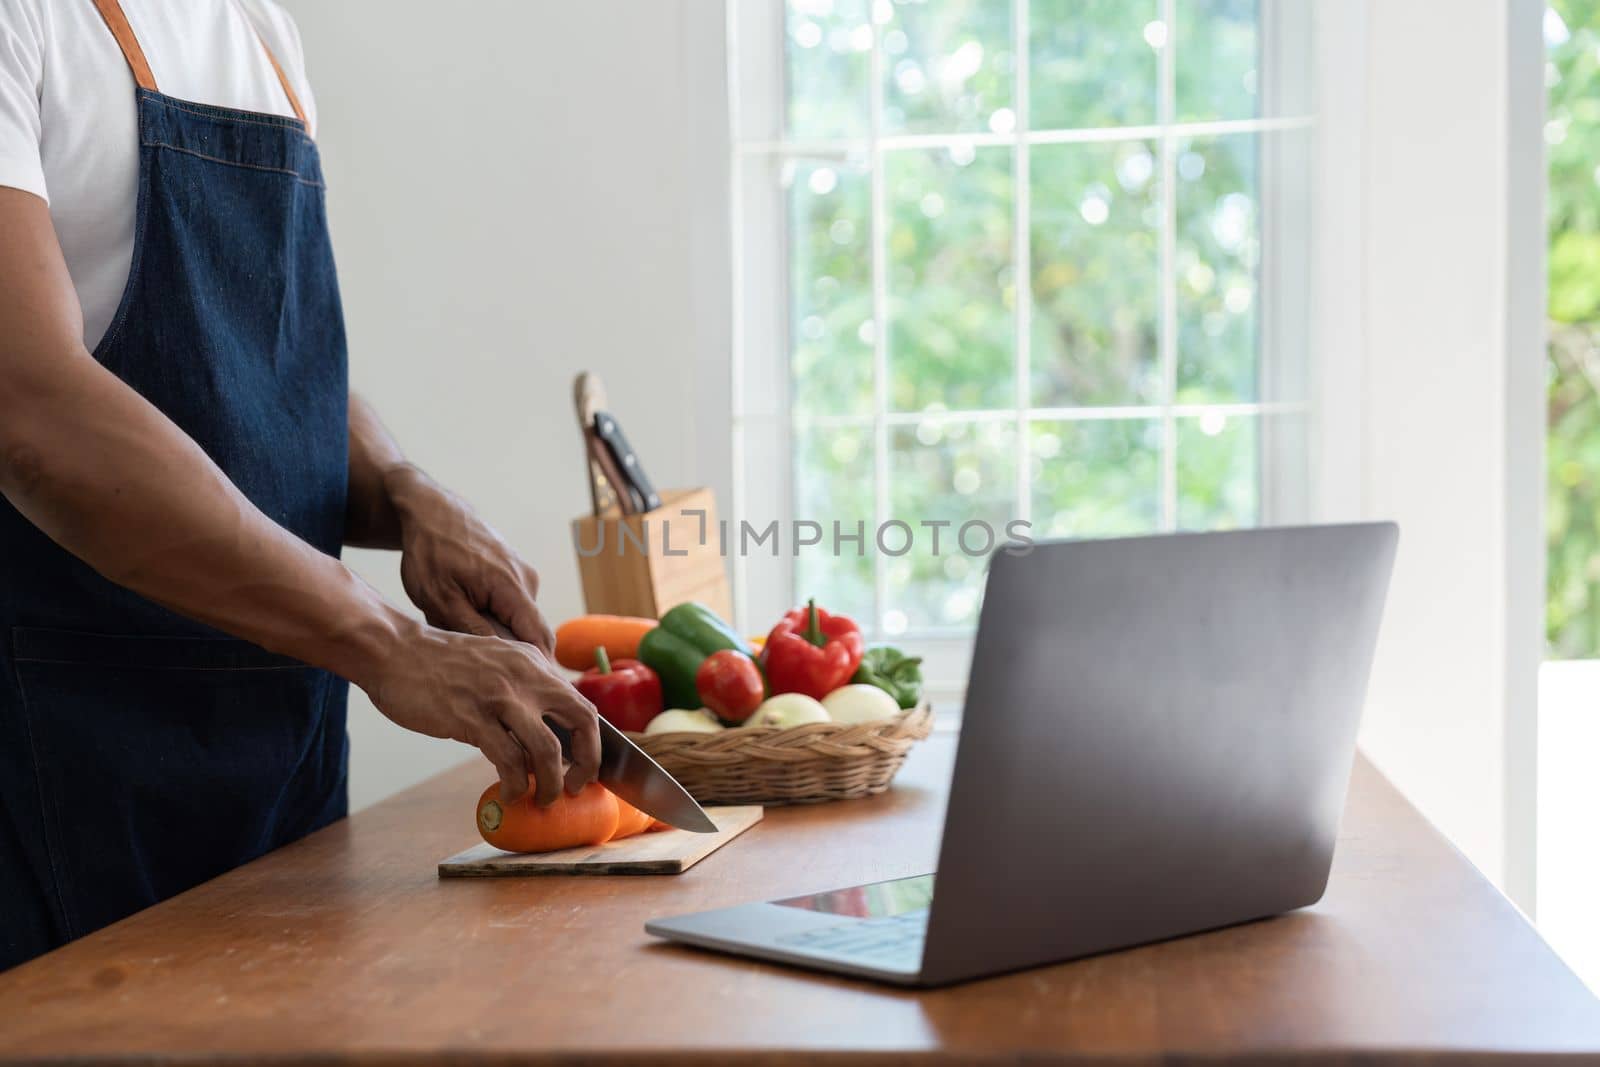 Man in kitchen looking at recipes on laptop while cooking.